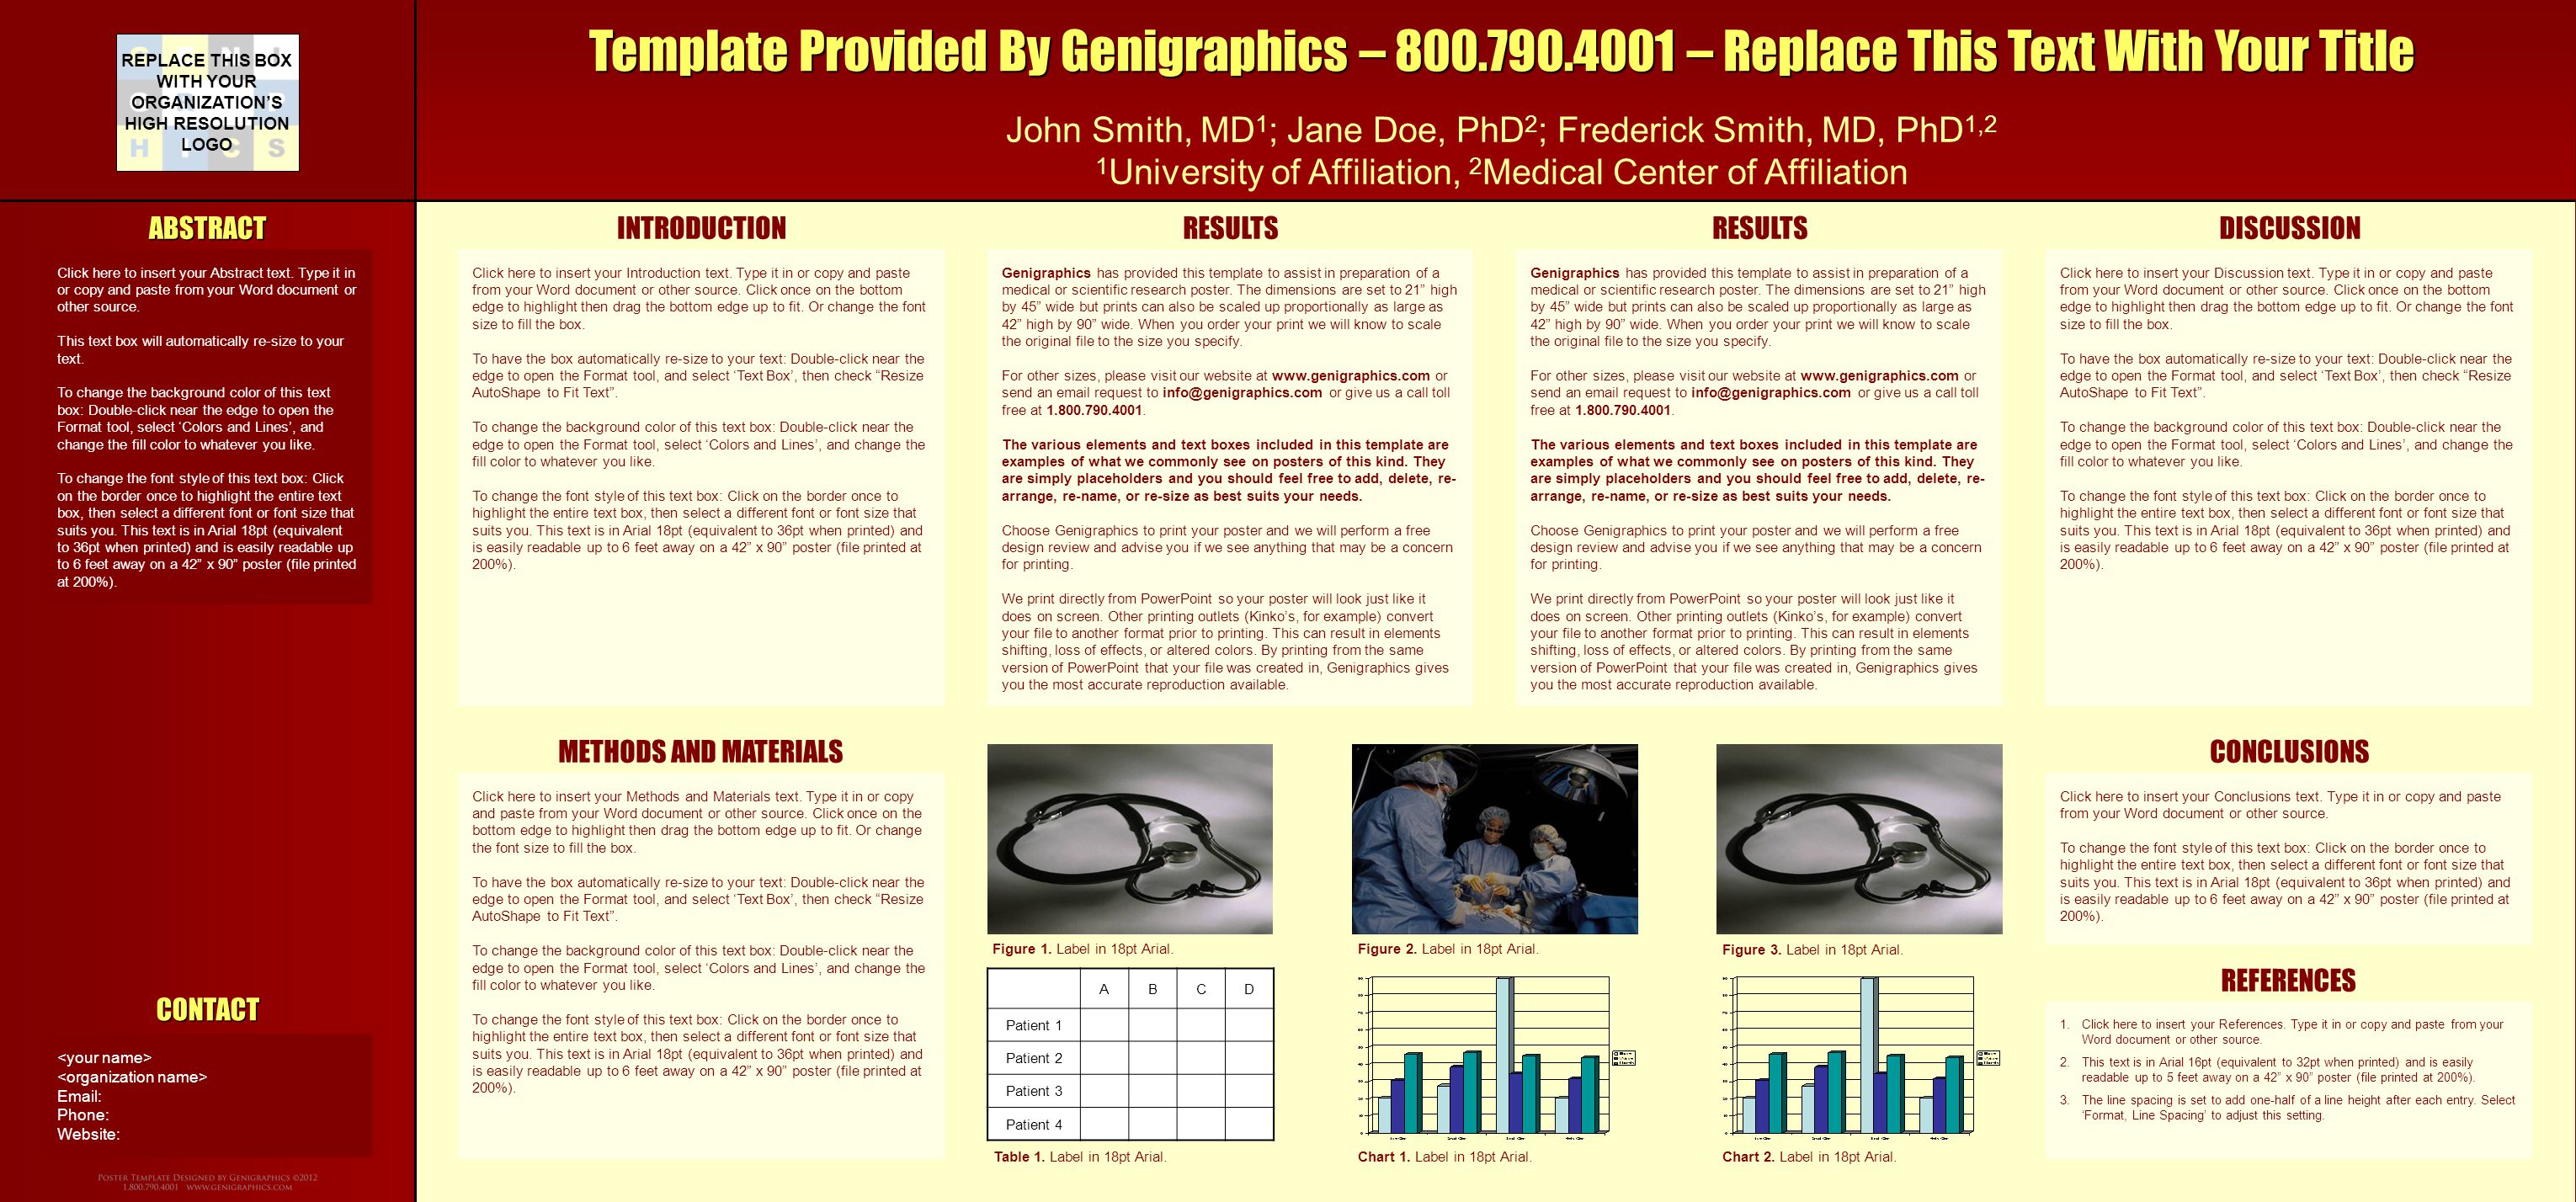 Template Provided By Genigraphics – – Replace This Text With Your Title John Smith, MD 1 ; Jane Doe, PhD 2 ; Frederick Smith, MD, PhD 1,2 1 University of Affiliation, 2 Medical Center of Affiliation REPLACE THIS BOX WITH YOUR ORGANIZATION’S HIGH RESOLUTION LOGO INTRODUCTION METHODS AND MATERIALSCONCLUSIONS DISCUSSIONRESULTS REFERENCES ABCD Patient 1 Patient 2 Patient 3 Patient 4 Chart 1.